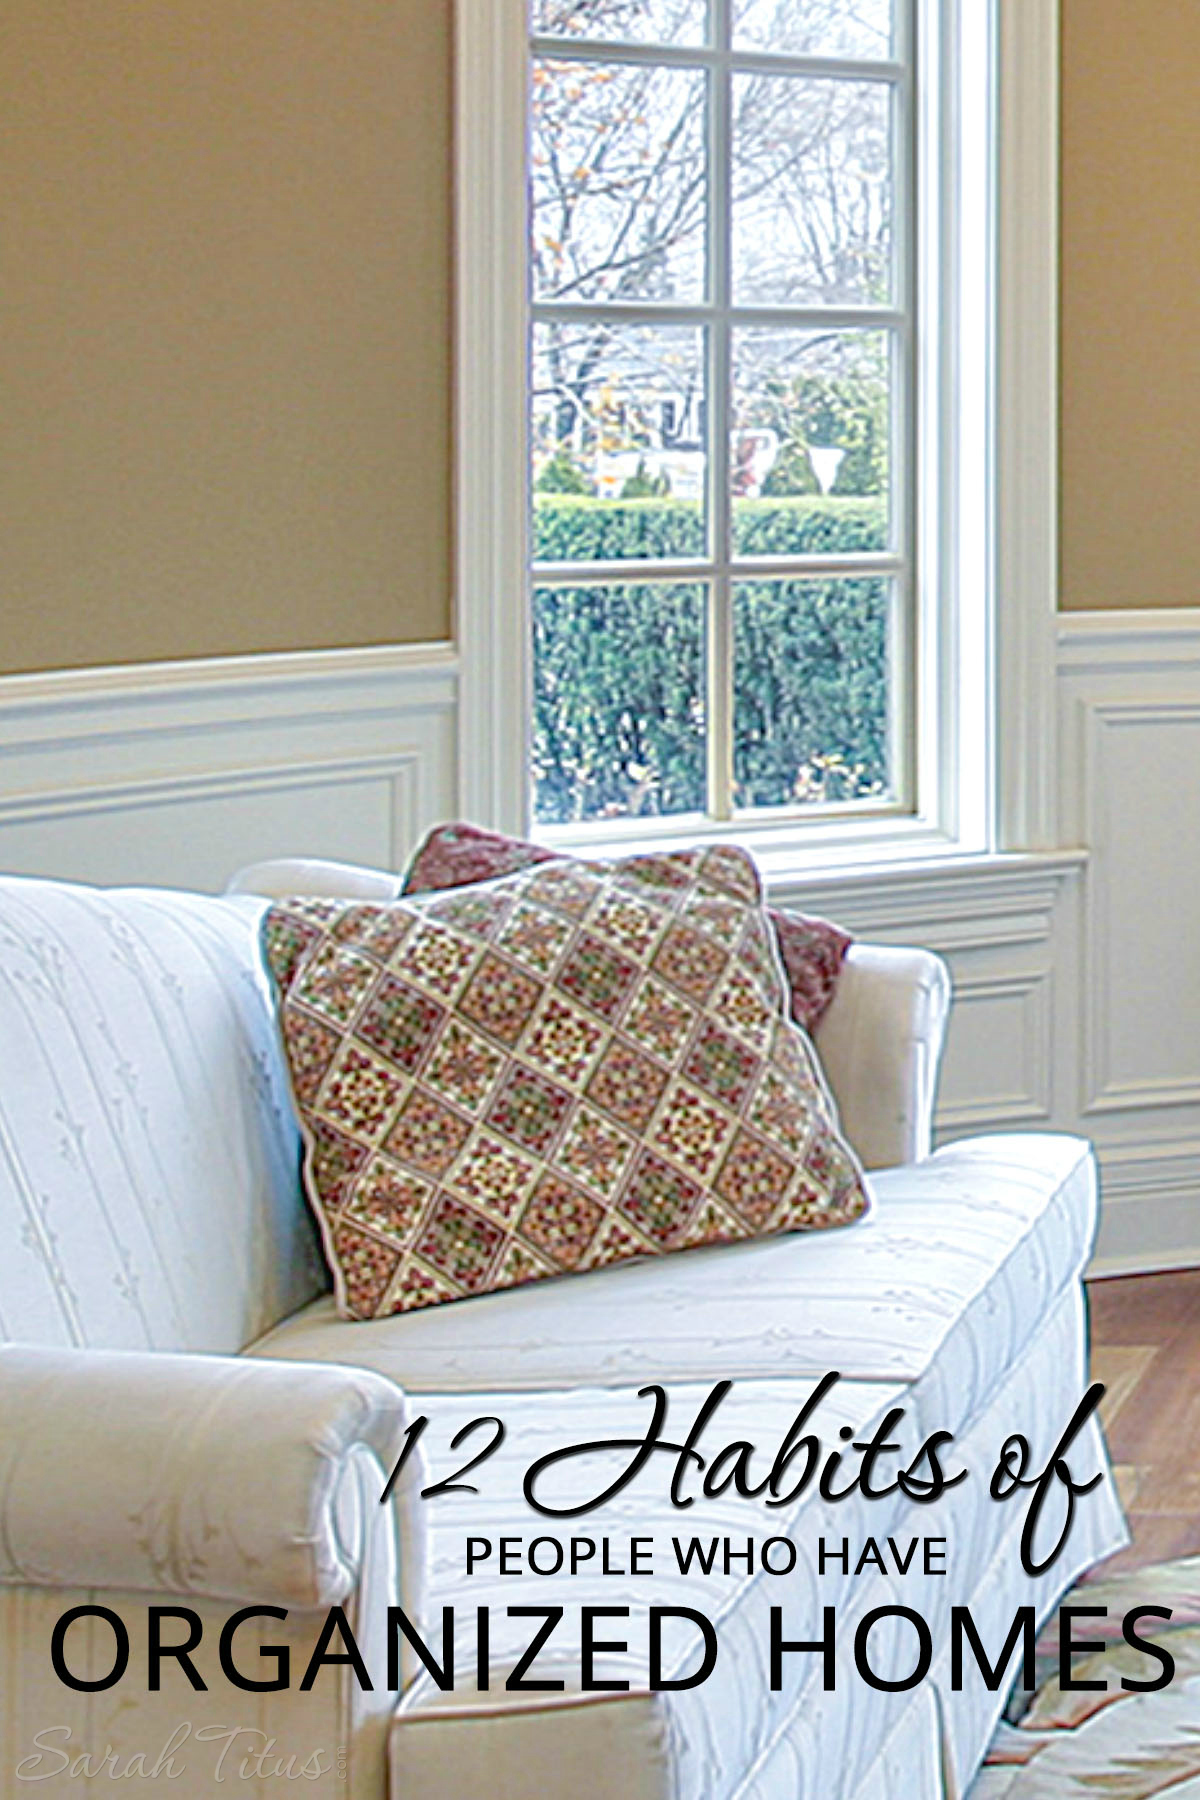 12 Habits of People Who Have Organized Homes - Sarah Titus